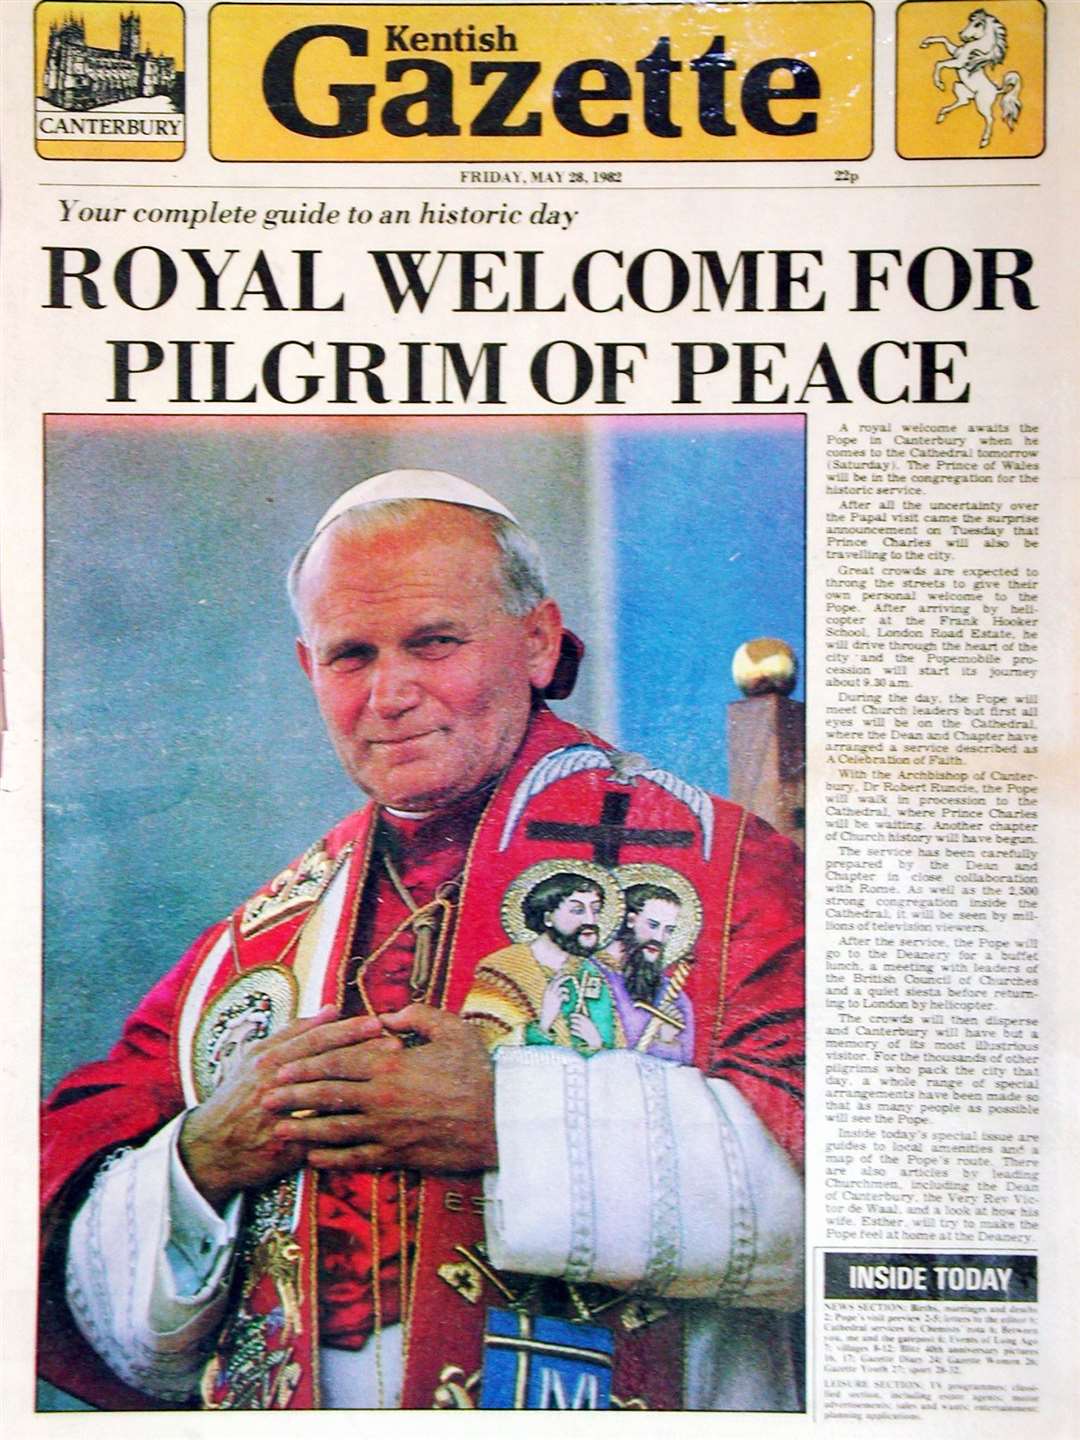 How the Gazette previewed the pontiff’s arrival